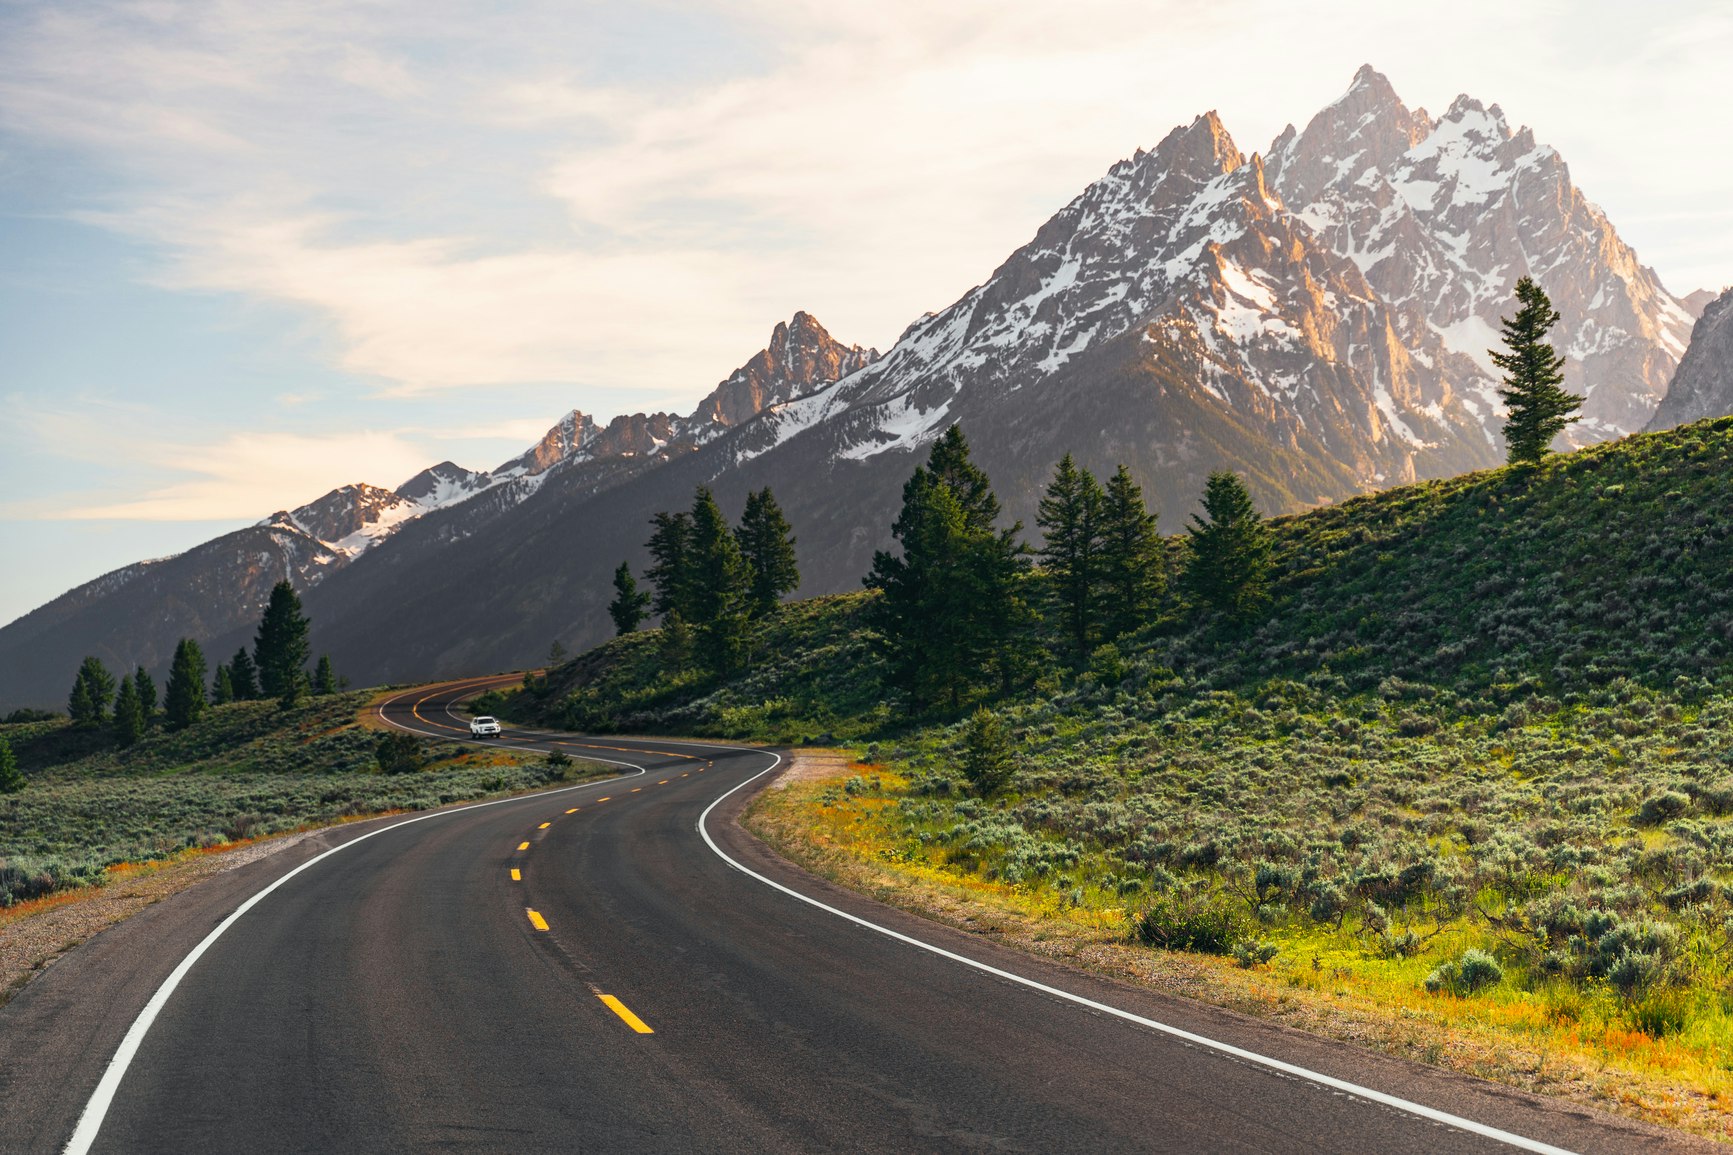 A winding road leads to the Teton Mountain Range at sunset in Grand Teton National Park, Wyoming.

